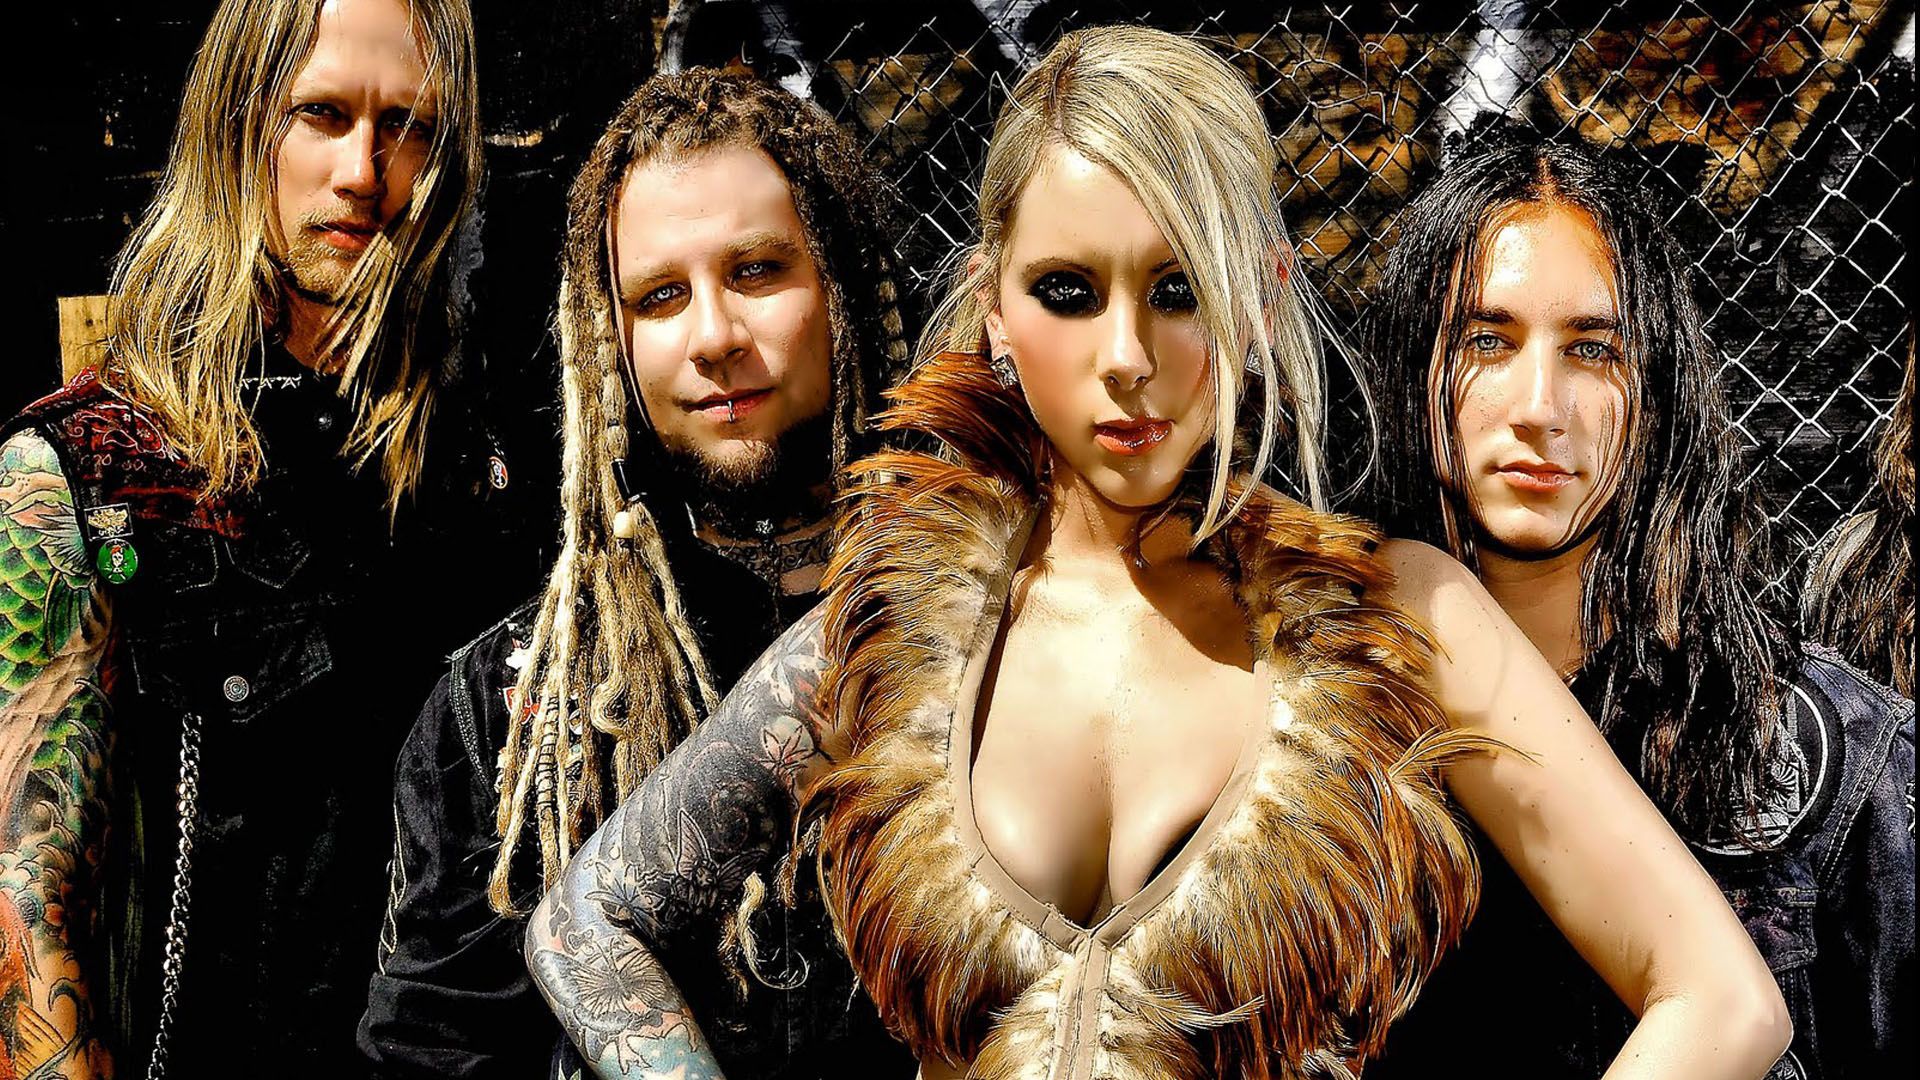 In This Moment Maria Brink women females girls babes heavy metal hard rock band group blondes gothic wallpaperx1080